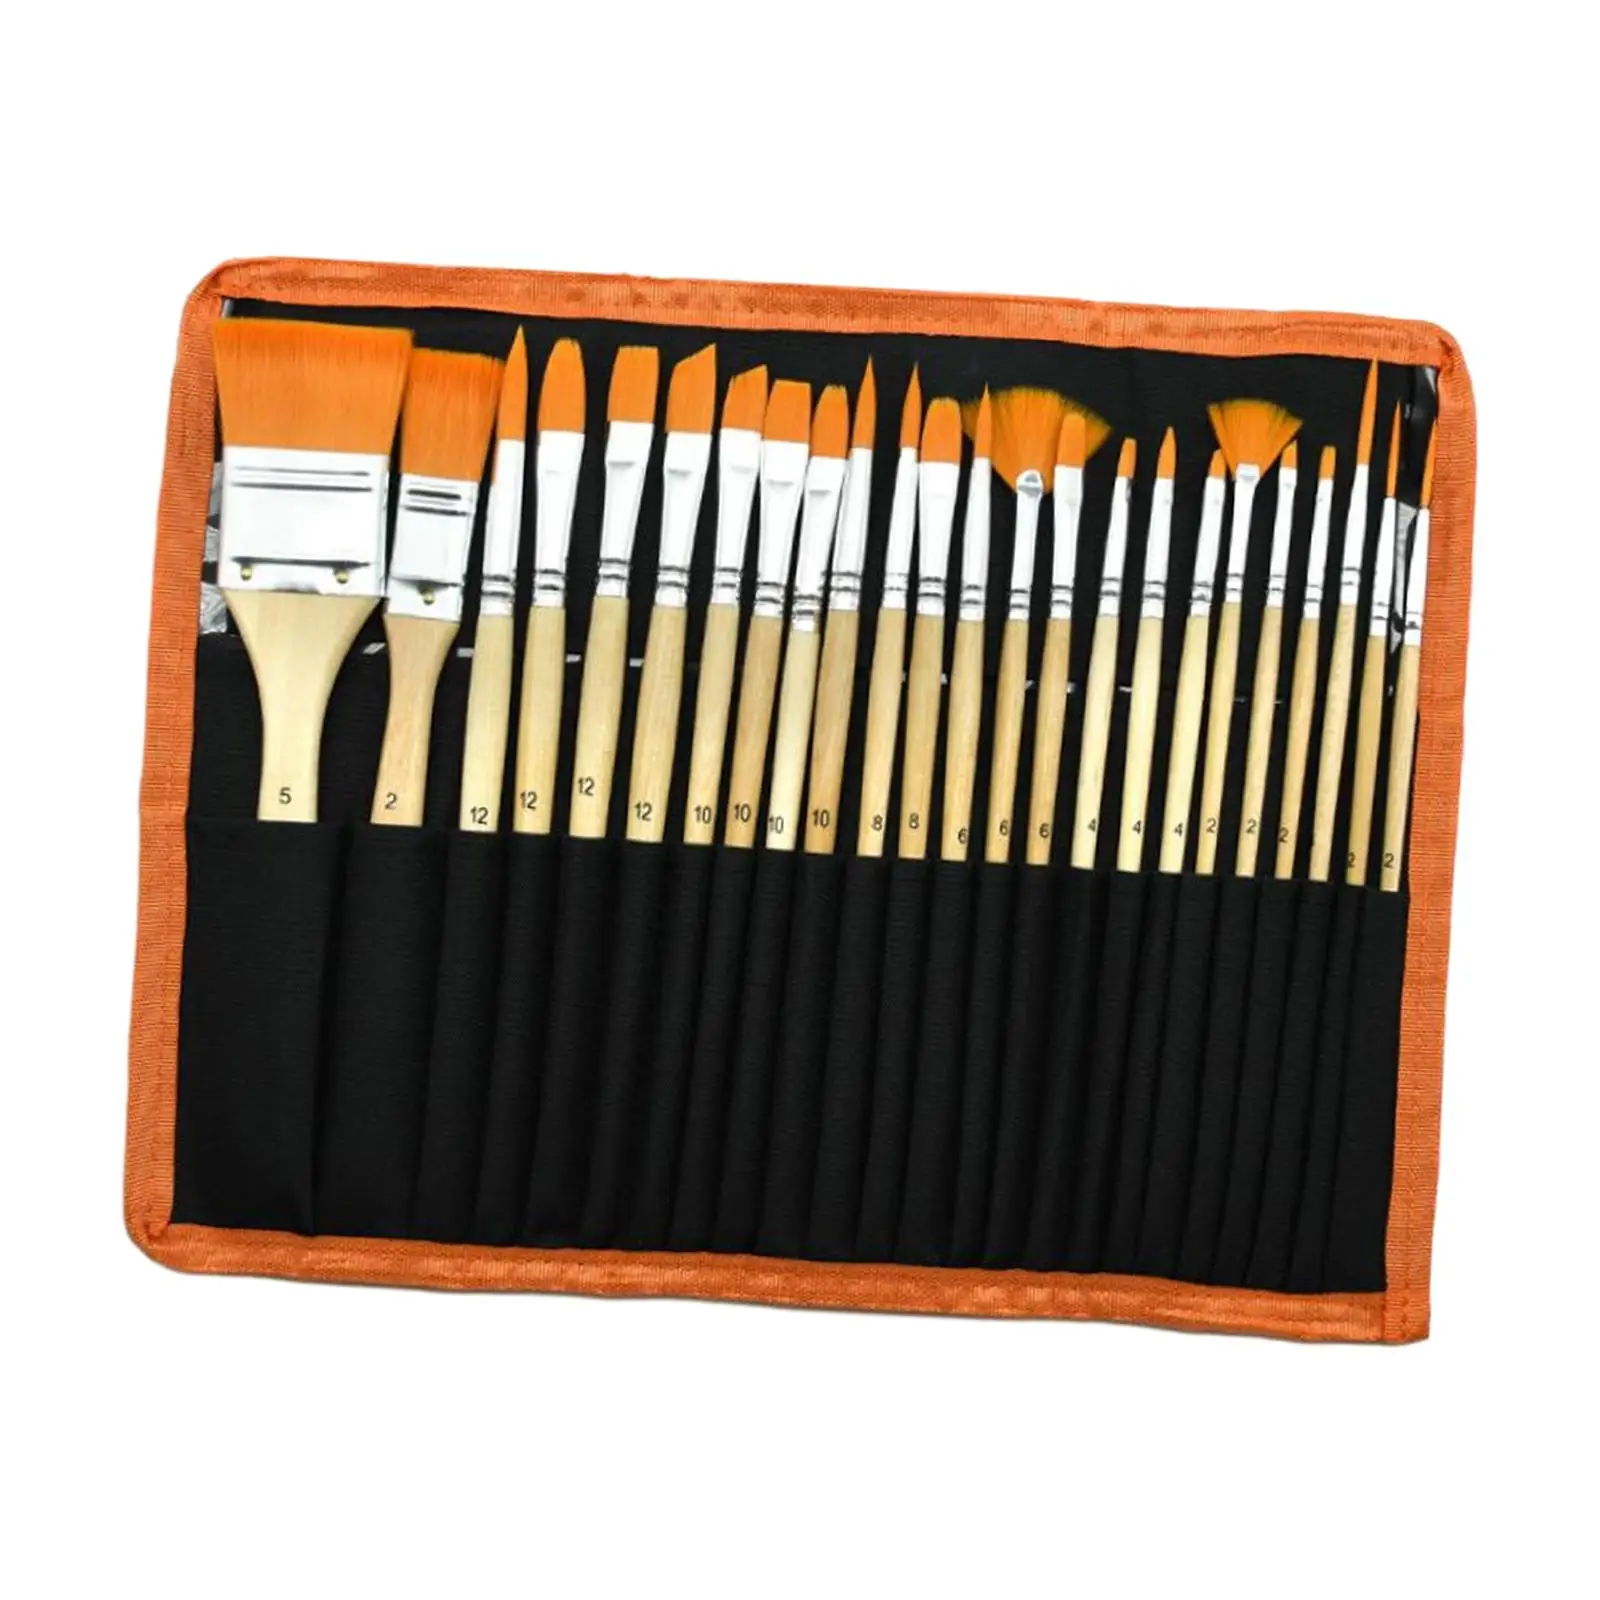 24Pcs Art Paint Brushes for Acrylic Painting Face Paint Brushes for Oil Watercolor Arts Crafts Drawing Gouache Pumpkin Painting